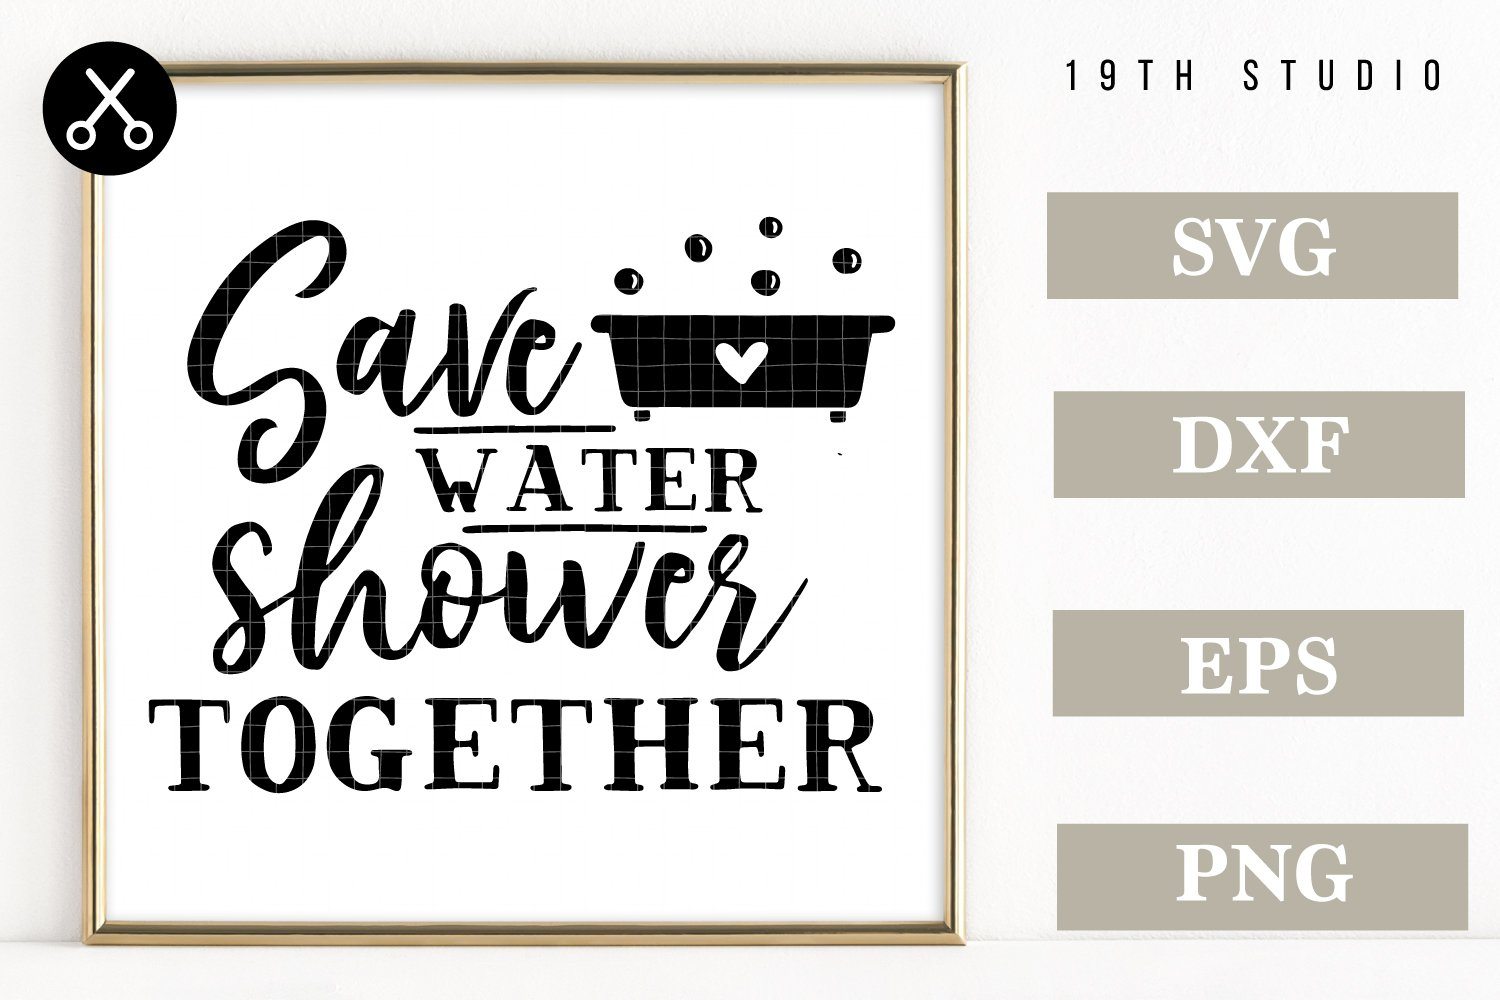 Funny Bathroom Signs SVG bundle - M32 Craft House SVG - SVG files for Cricut and Silhouette